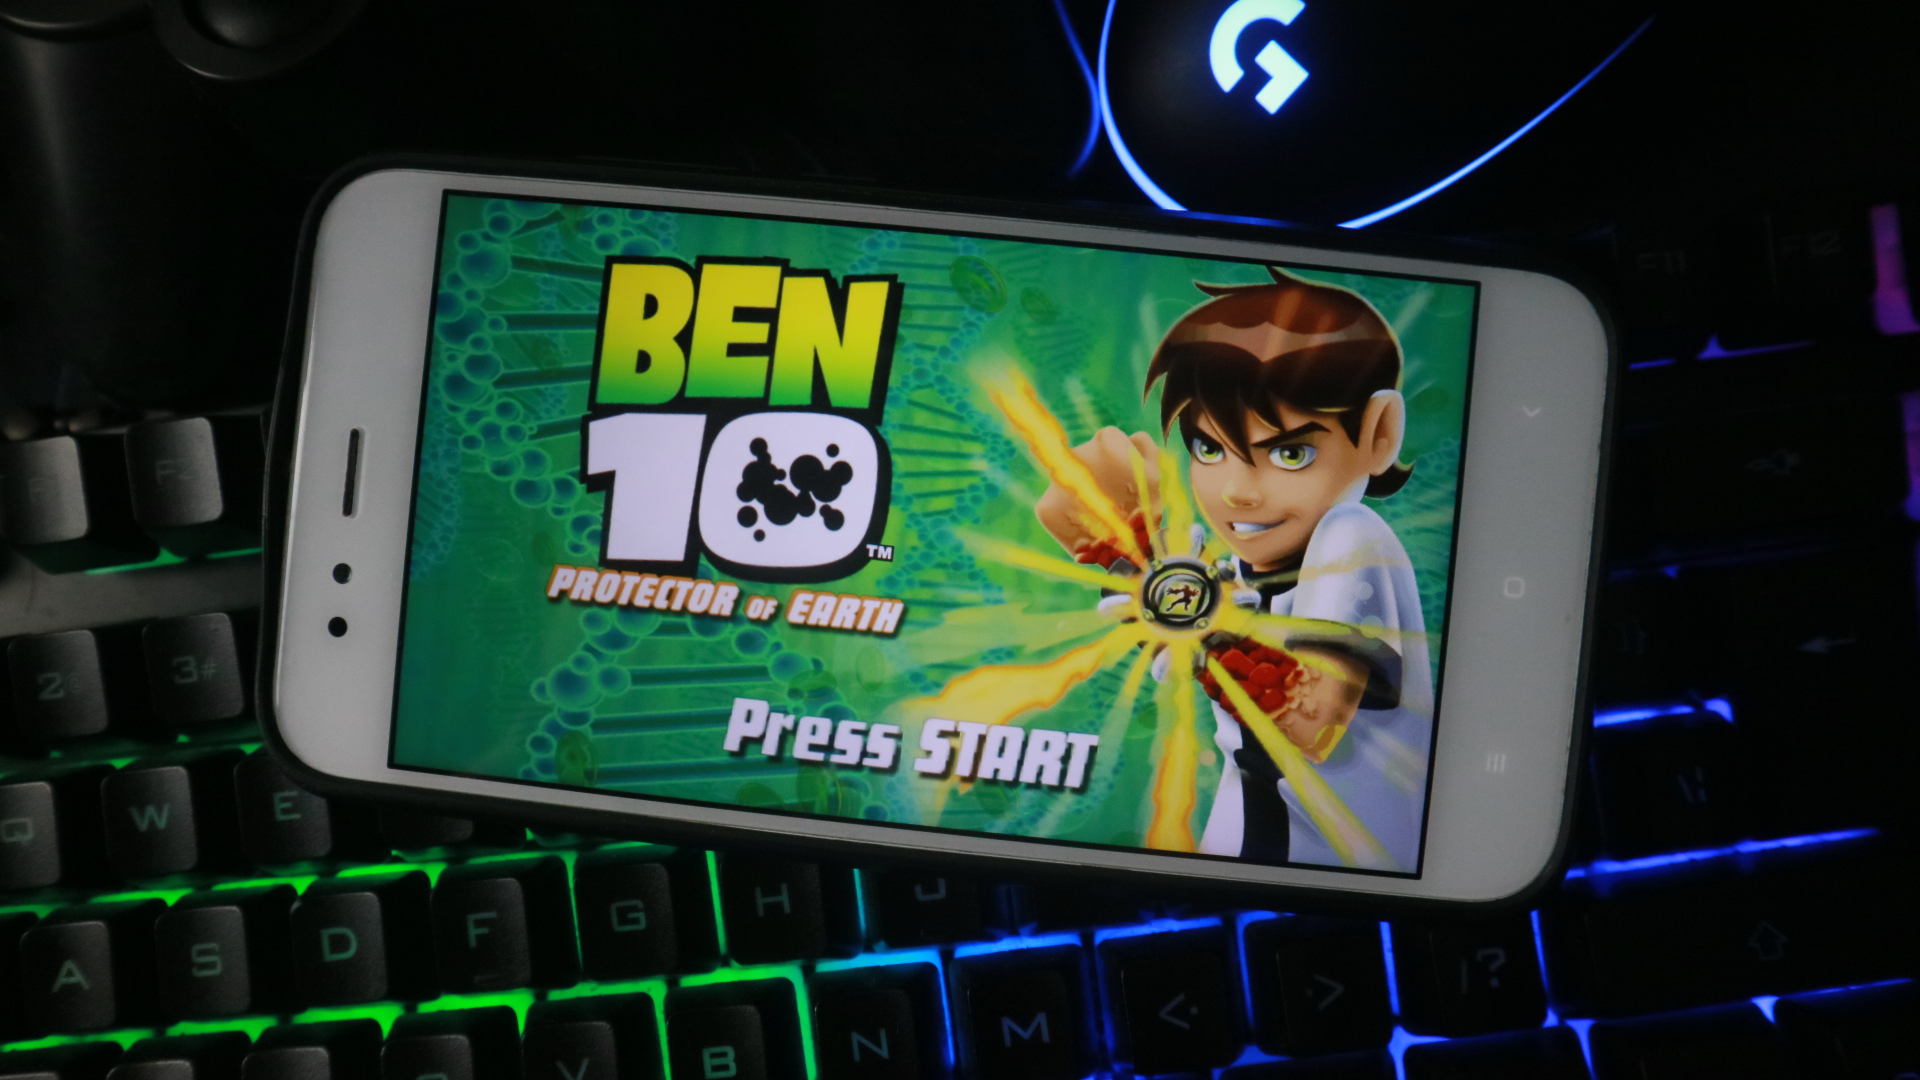 download ben 10 protector of earth iso tpb down